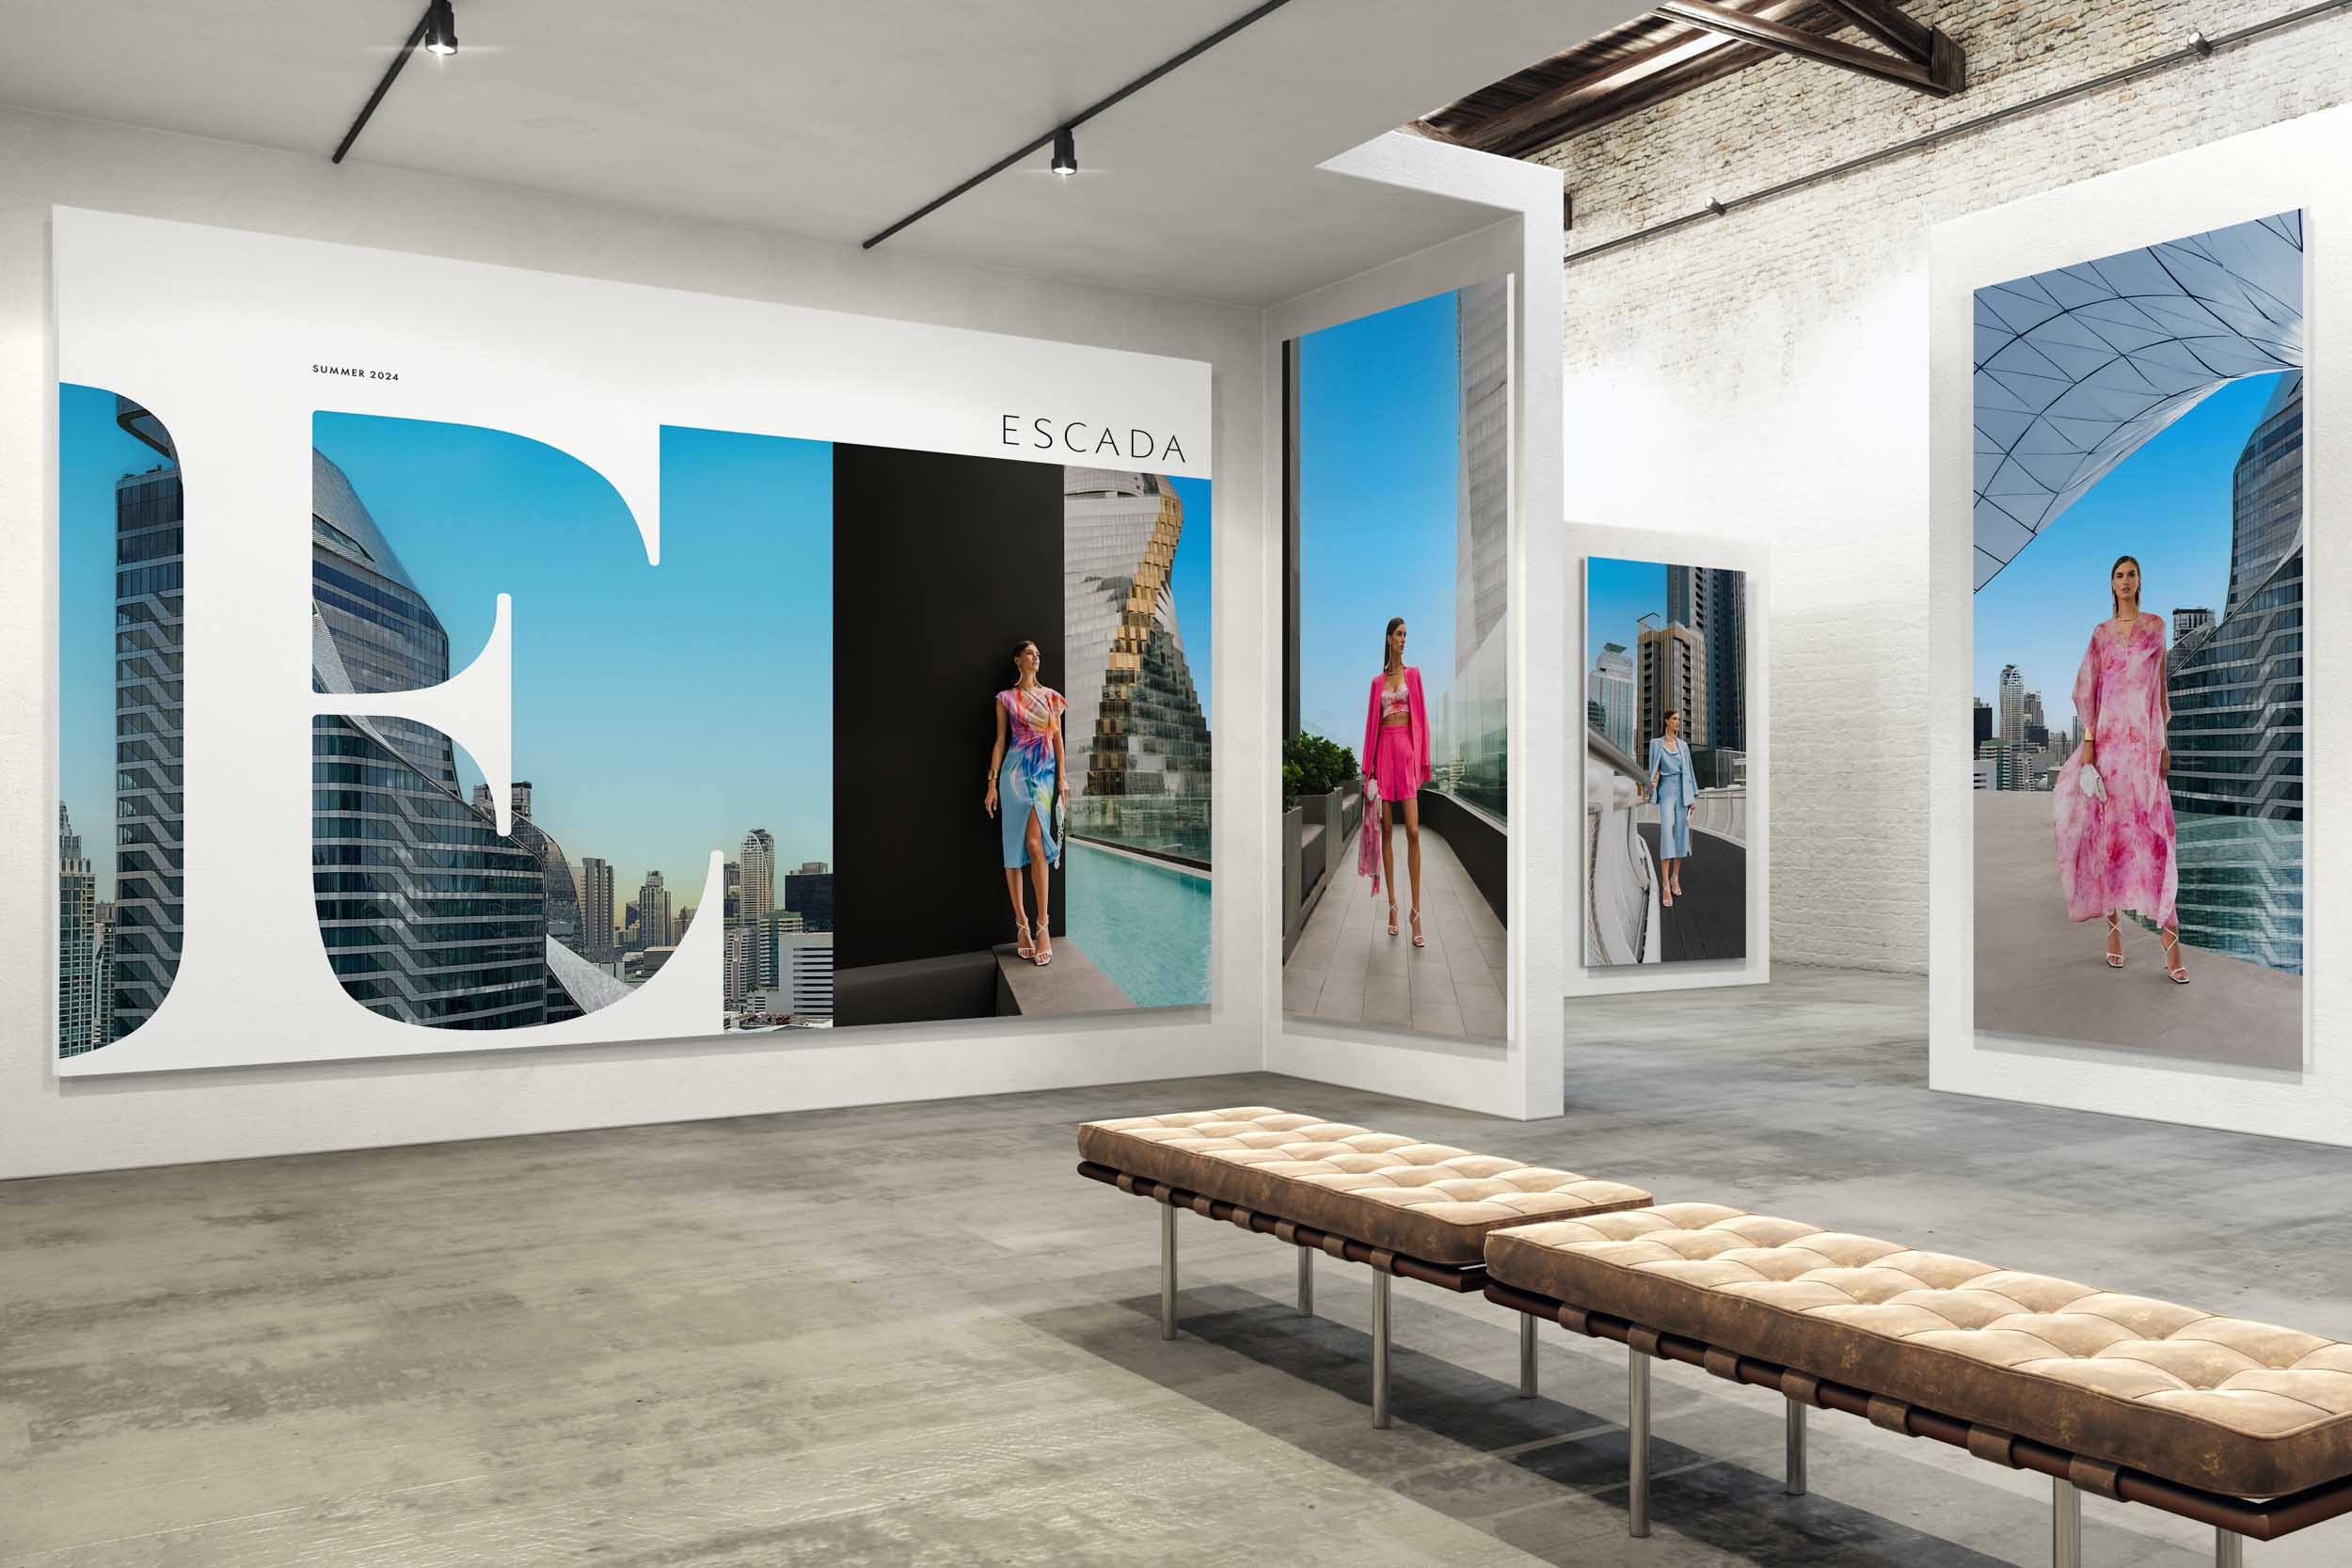 Escada retail space with fashion imagery